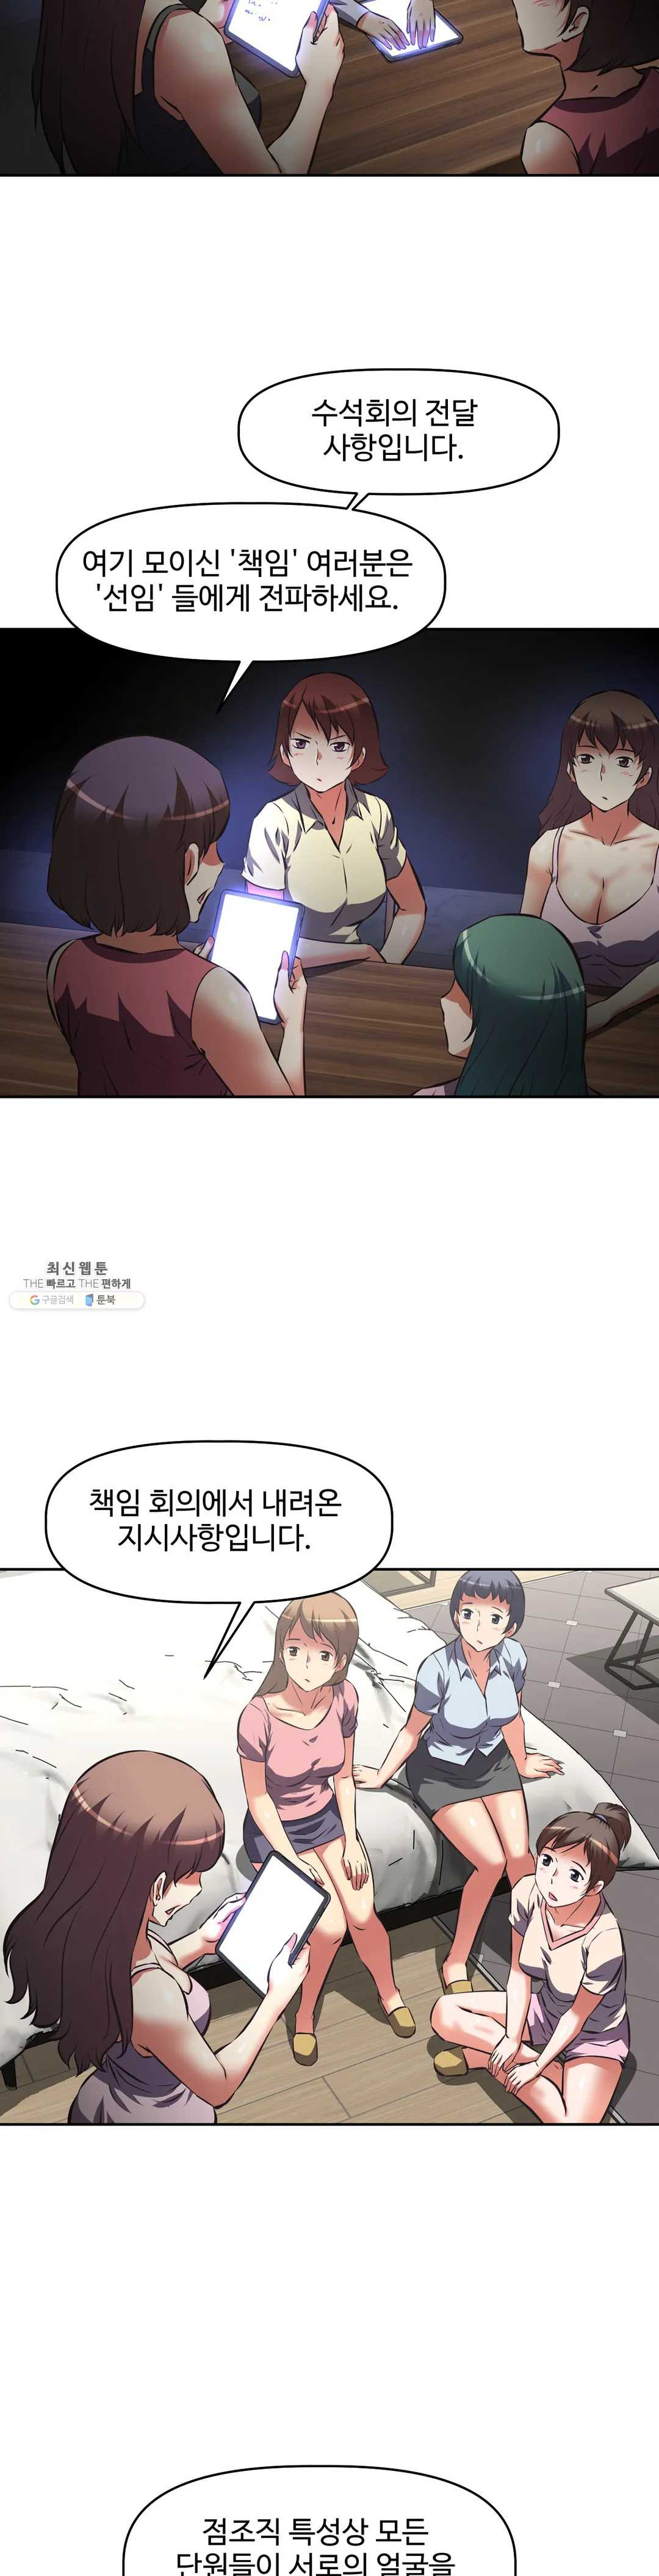 The Girls’ Nest Raw - Chapter 47 Page 2